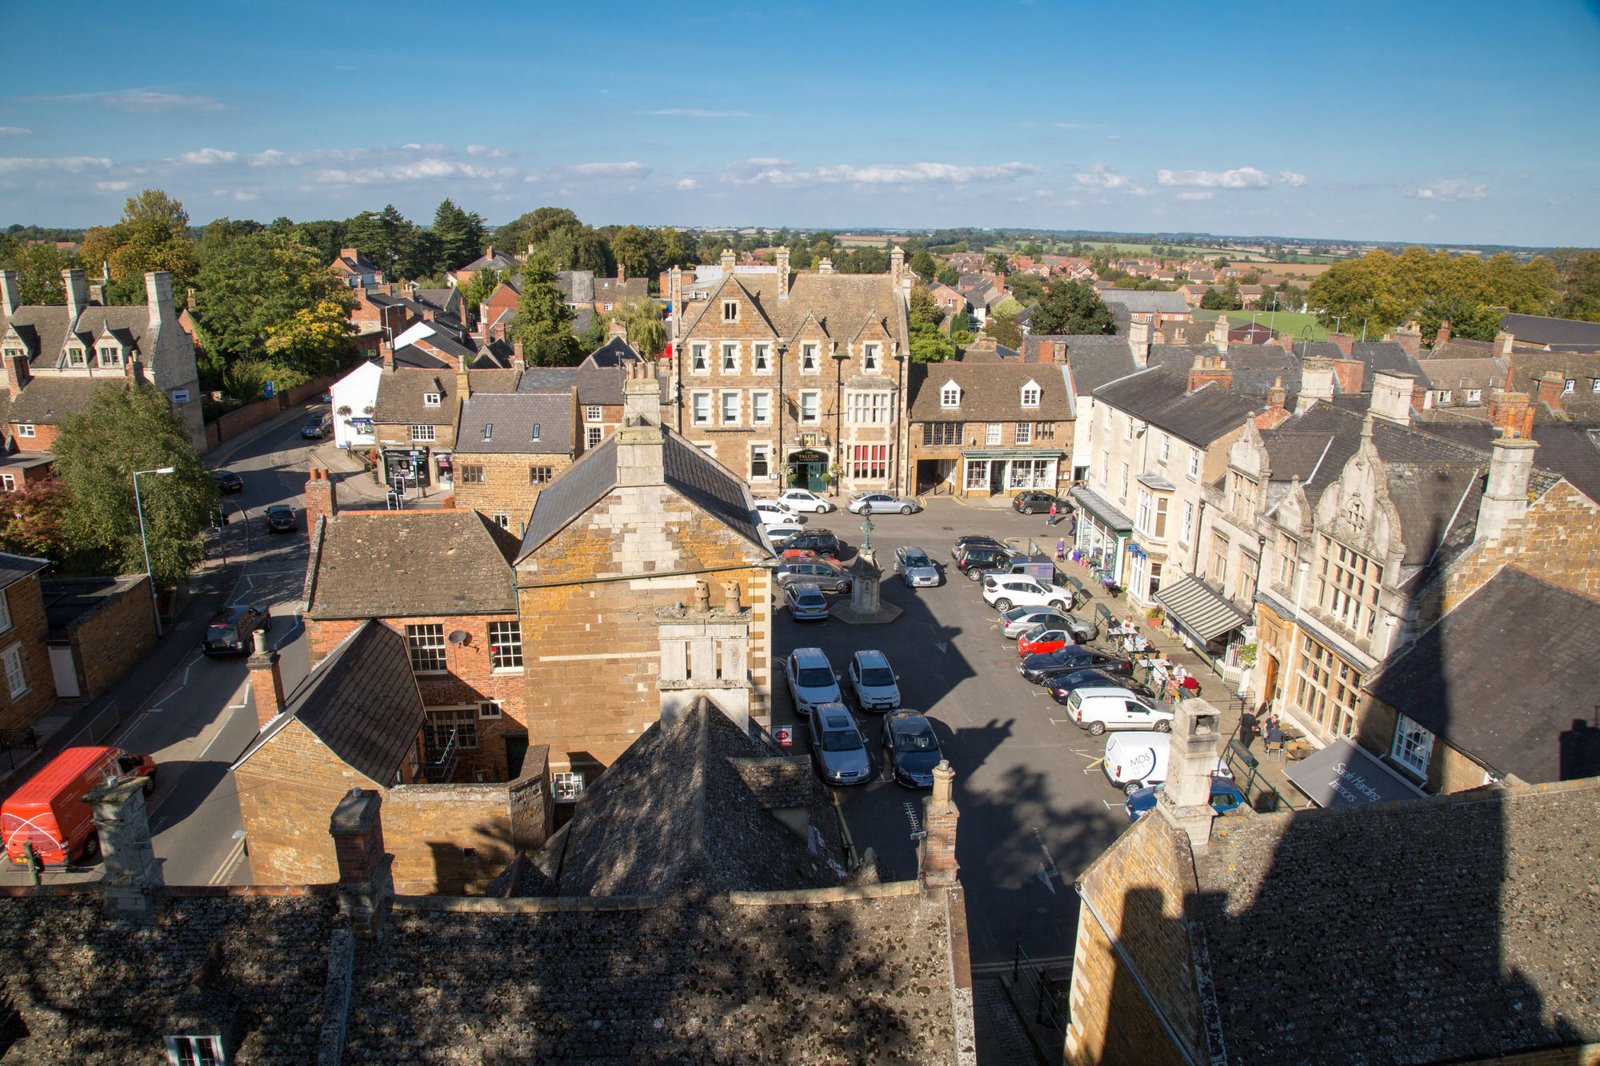 View from the air of a traditional market place. A beautiful coaching in built in stone the colour of gingerbread, pubs, cafes and shops surround parked cars in the centre.